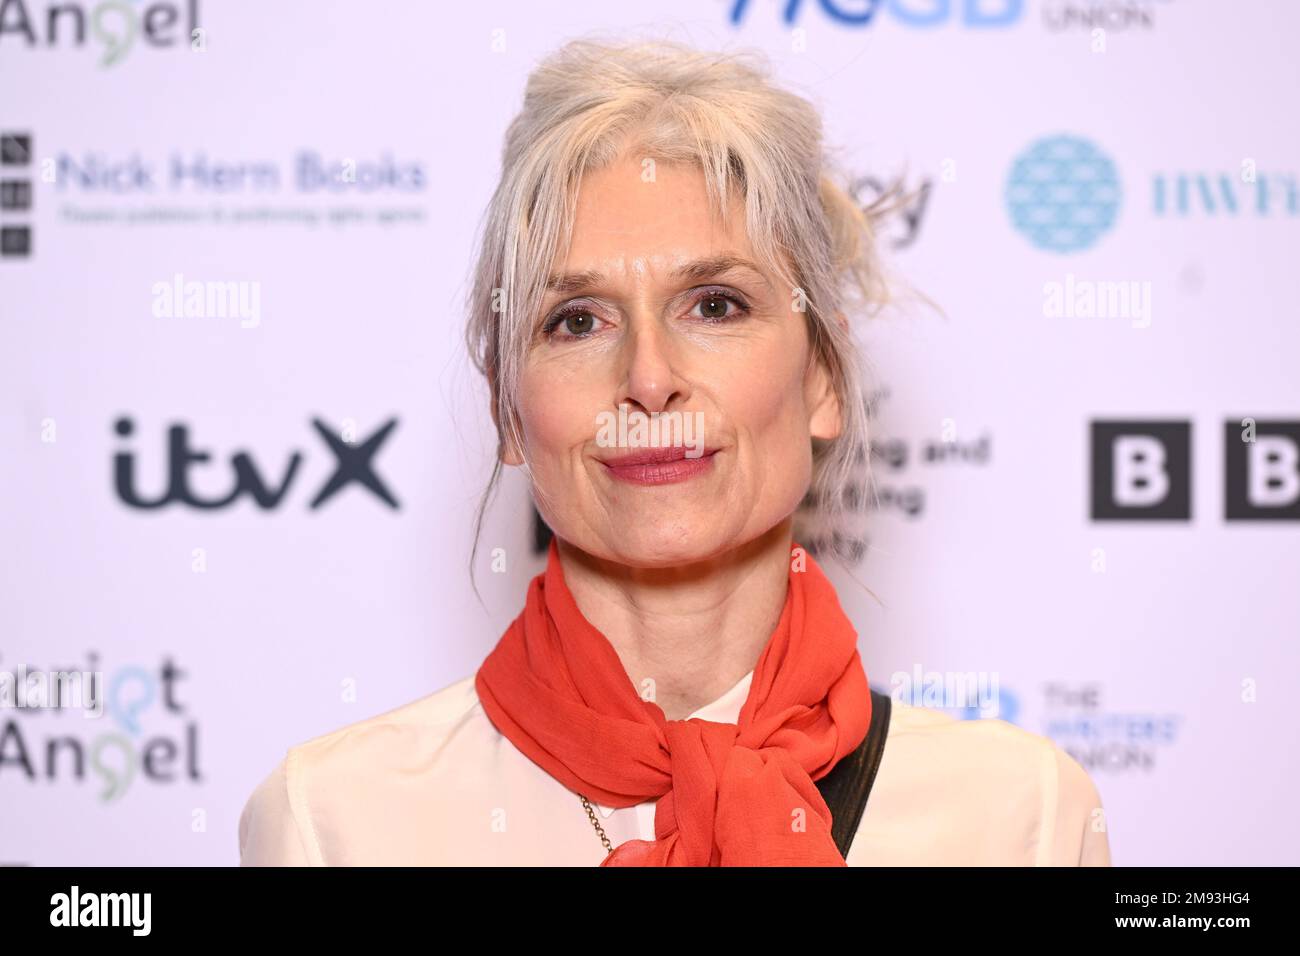 London, UK. 16 January 2023. Amelia Bullmore attending the 2023 Writers' Guild of Great Britain Awards, at the Royal College Of Physicians, London. Picture date: Monday January 16, 2023. Photo credit should read: Matt Crossick/Empics/Alamy Live News Stock Photo